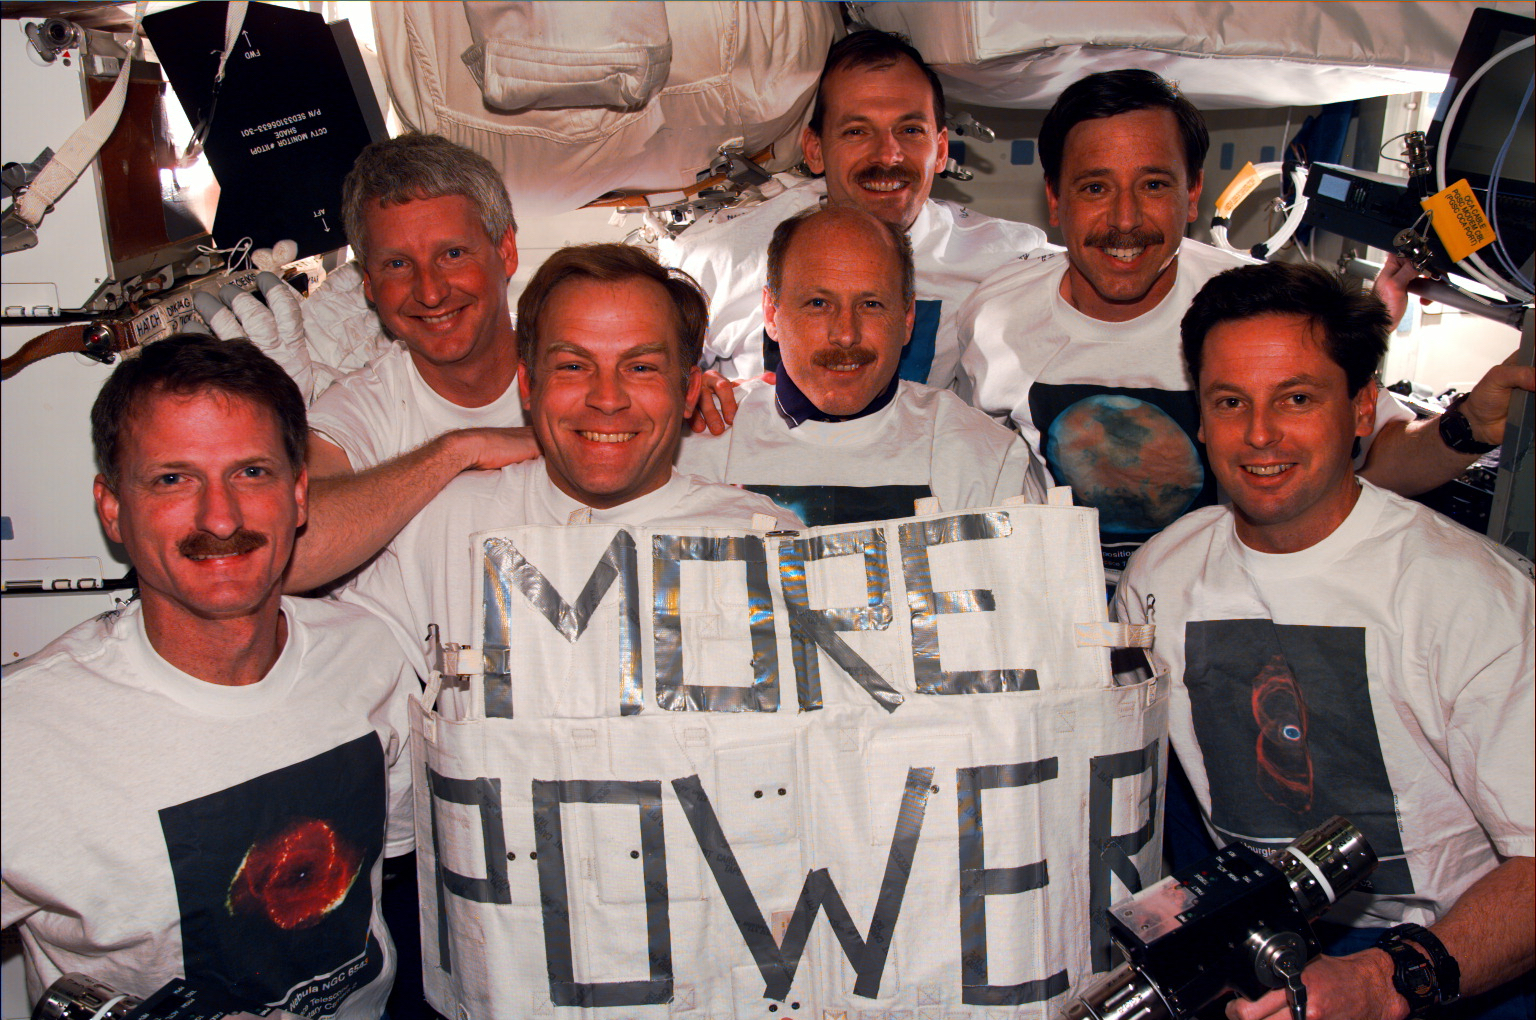 A crew photo inside the shuttle's cabin with them holding a sign that says "MORE POWER"